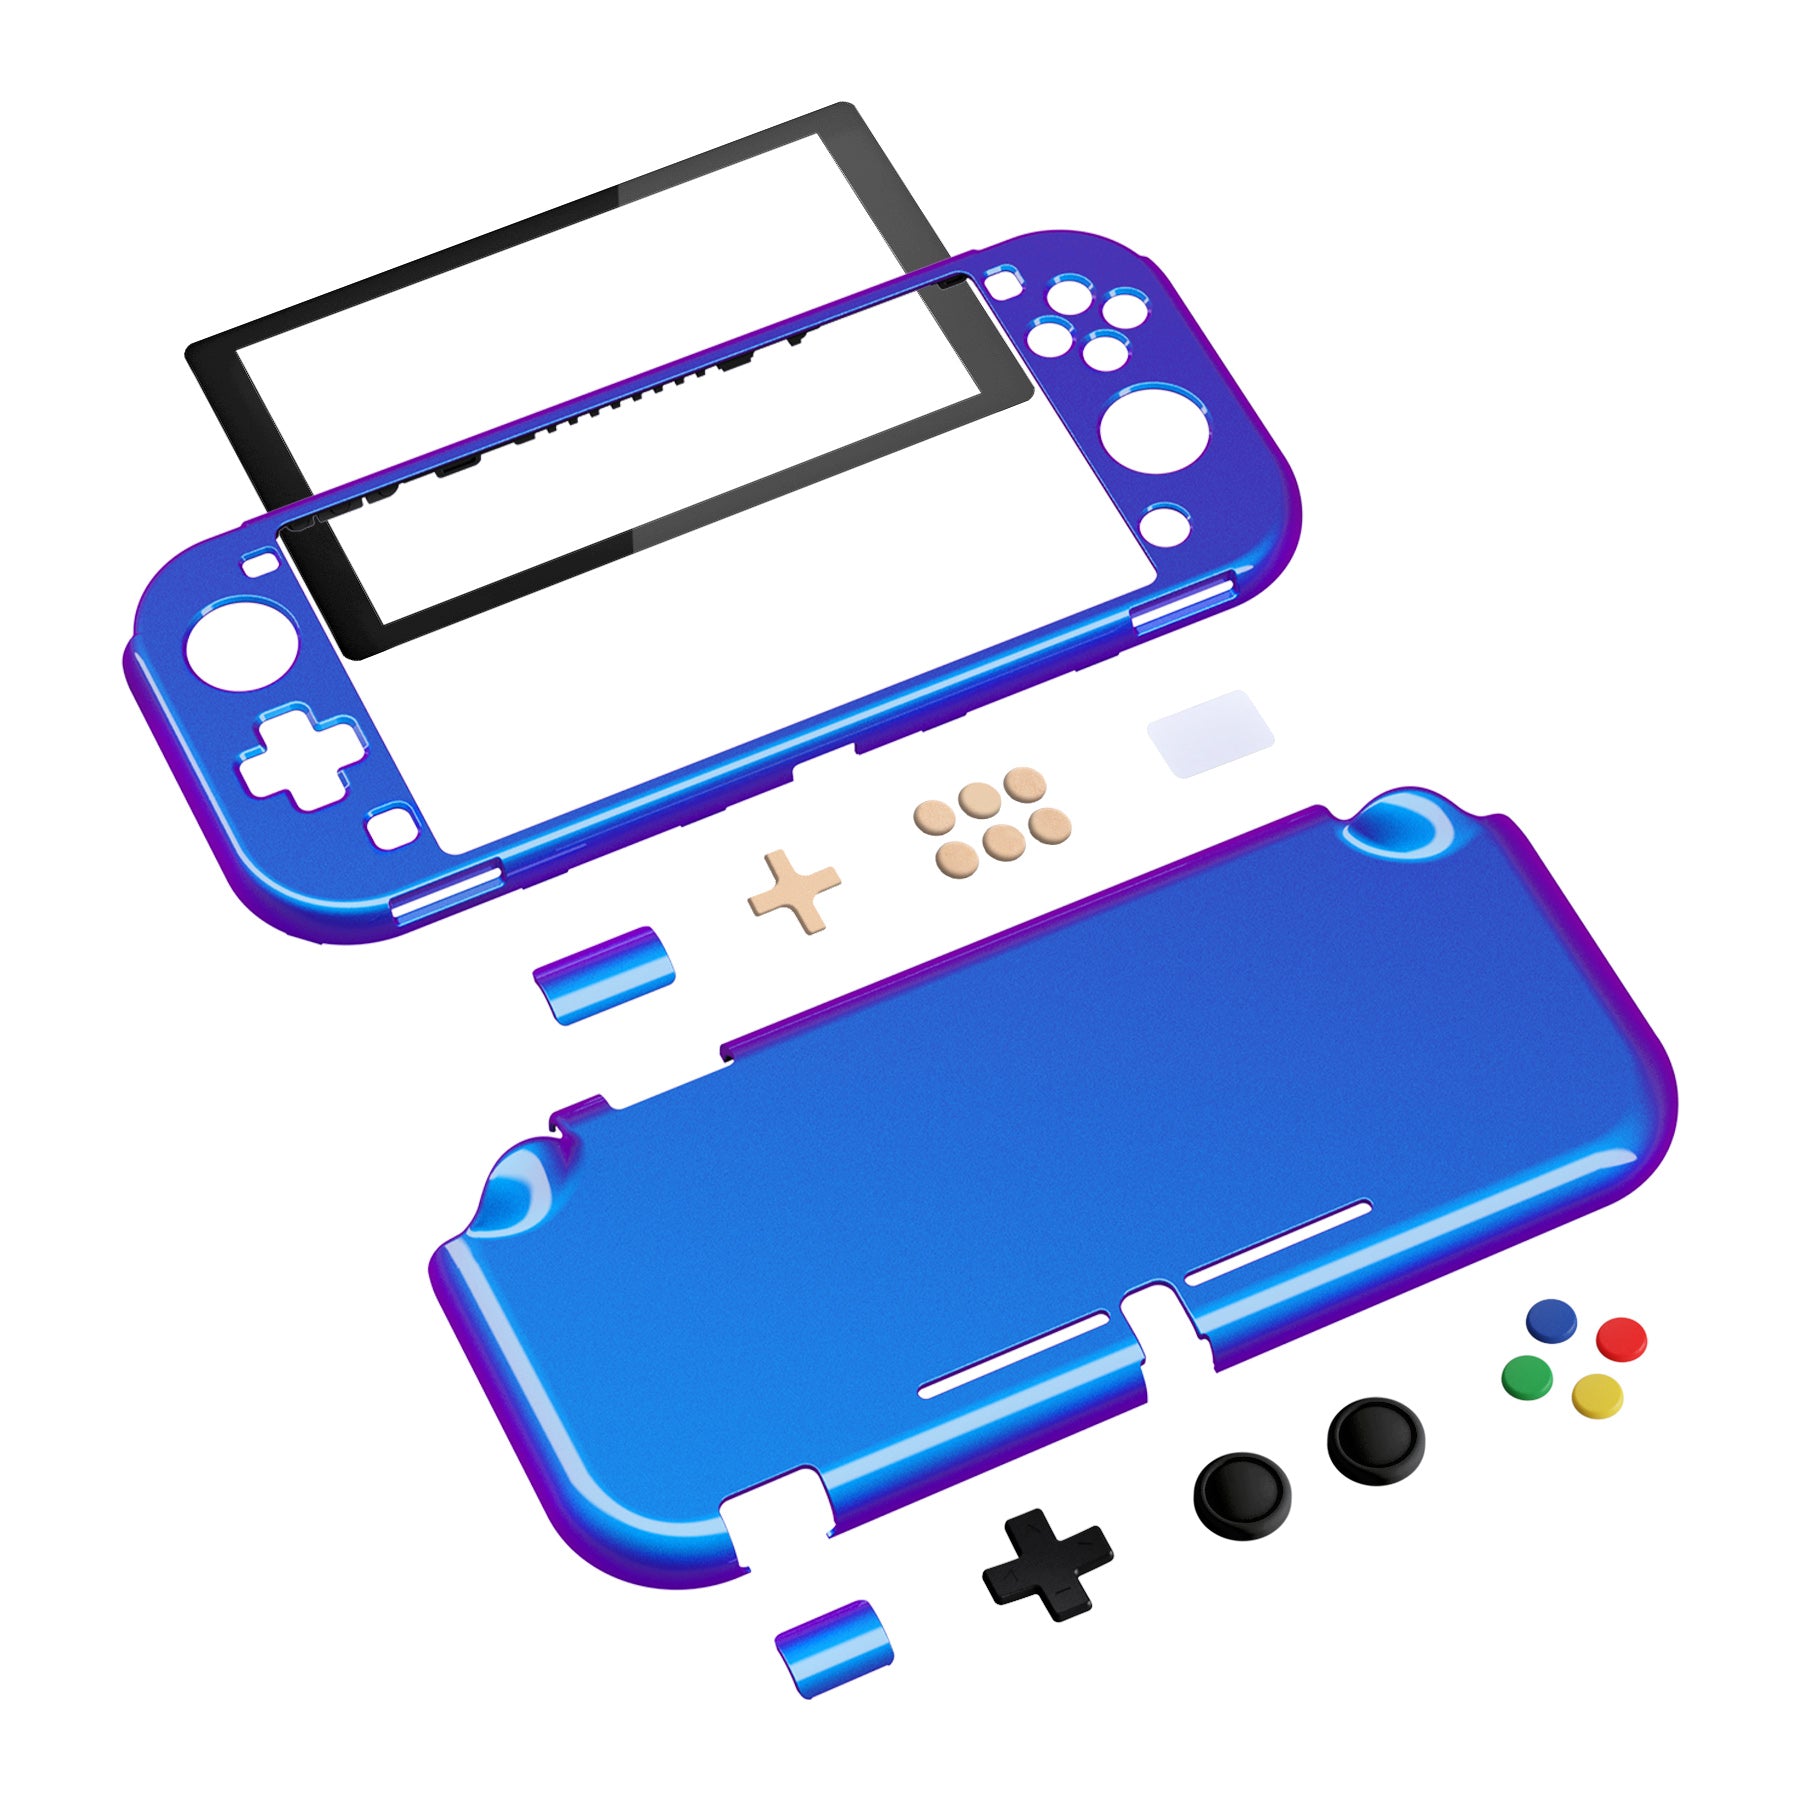 PlayVital Glossy Chameleon Purple Blue Protective Case for NS Switch Lite, Hard Cover Protector for NS Switch Lite - 1 x Black Border Tempered Glass Screen Protector Included - YYNLP001 PlayVital